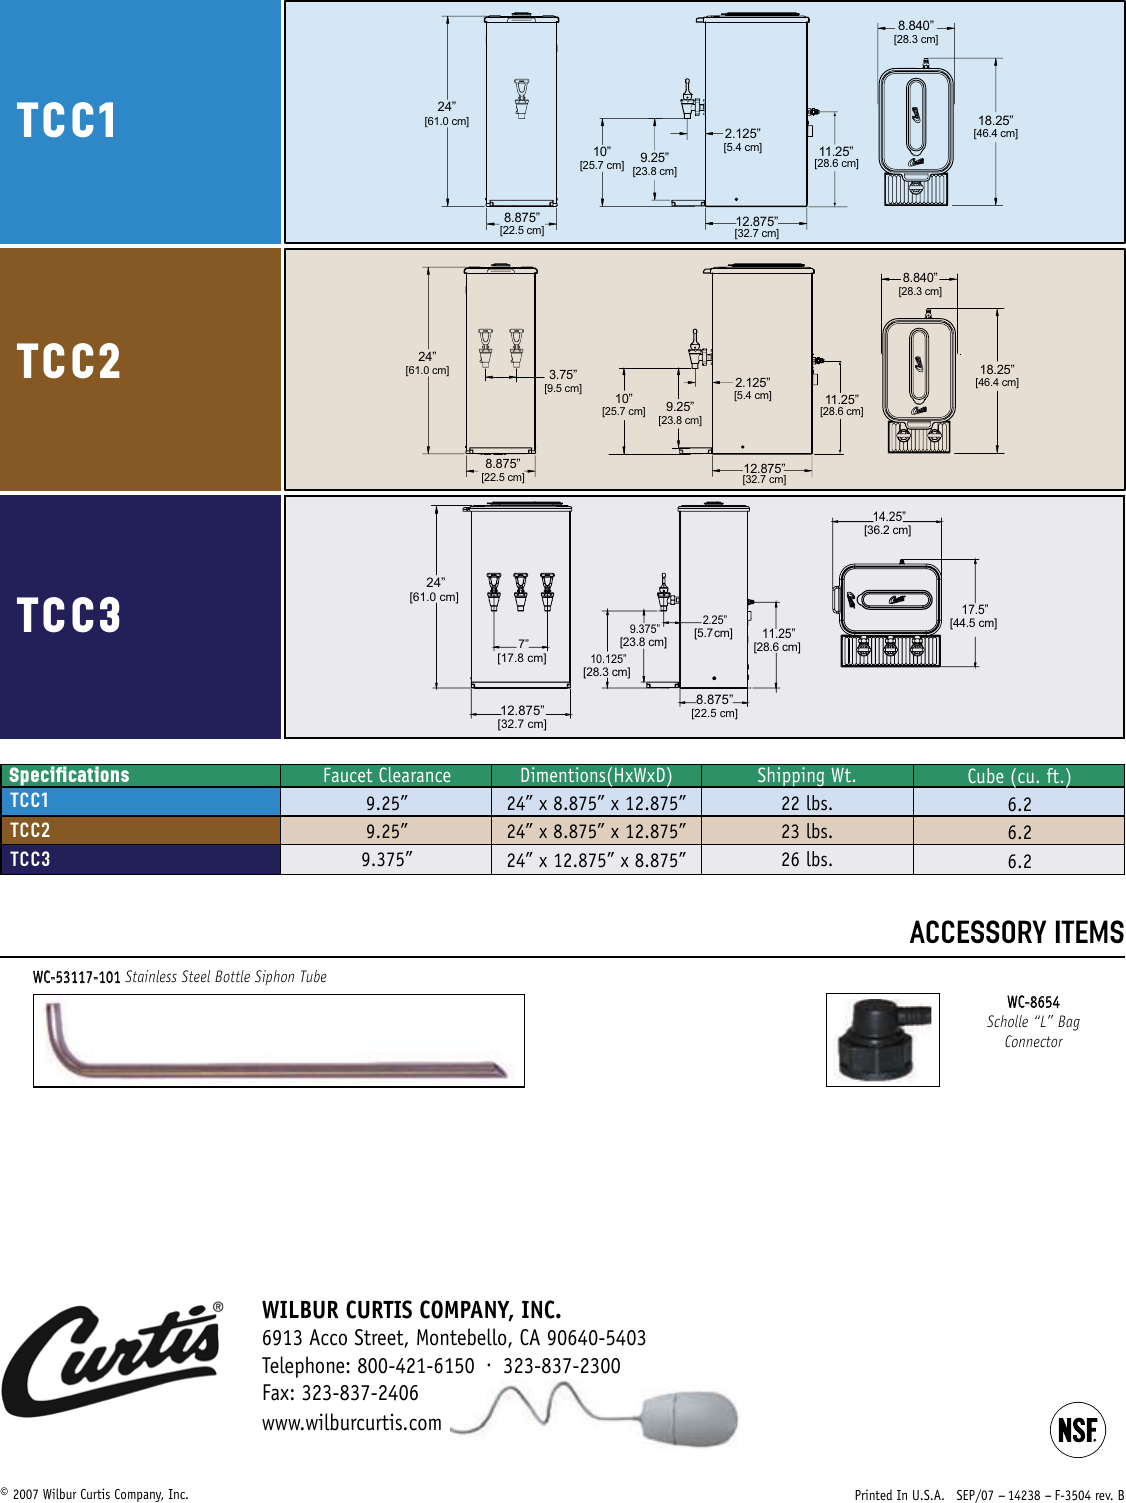 Page 2 of 2 - Curtis Curtis-Tcc1-Users-Manual-  Curtis-tcc1-users-manual